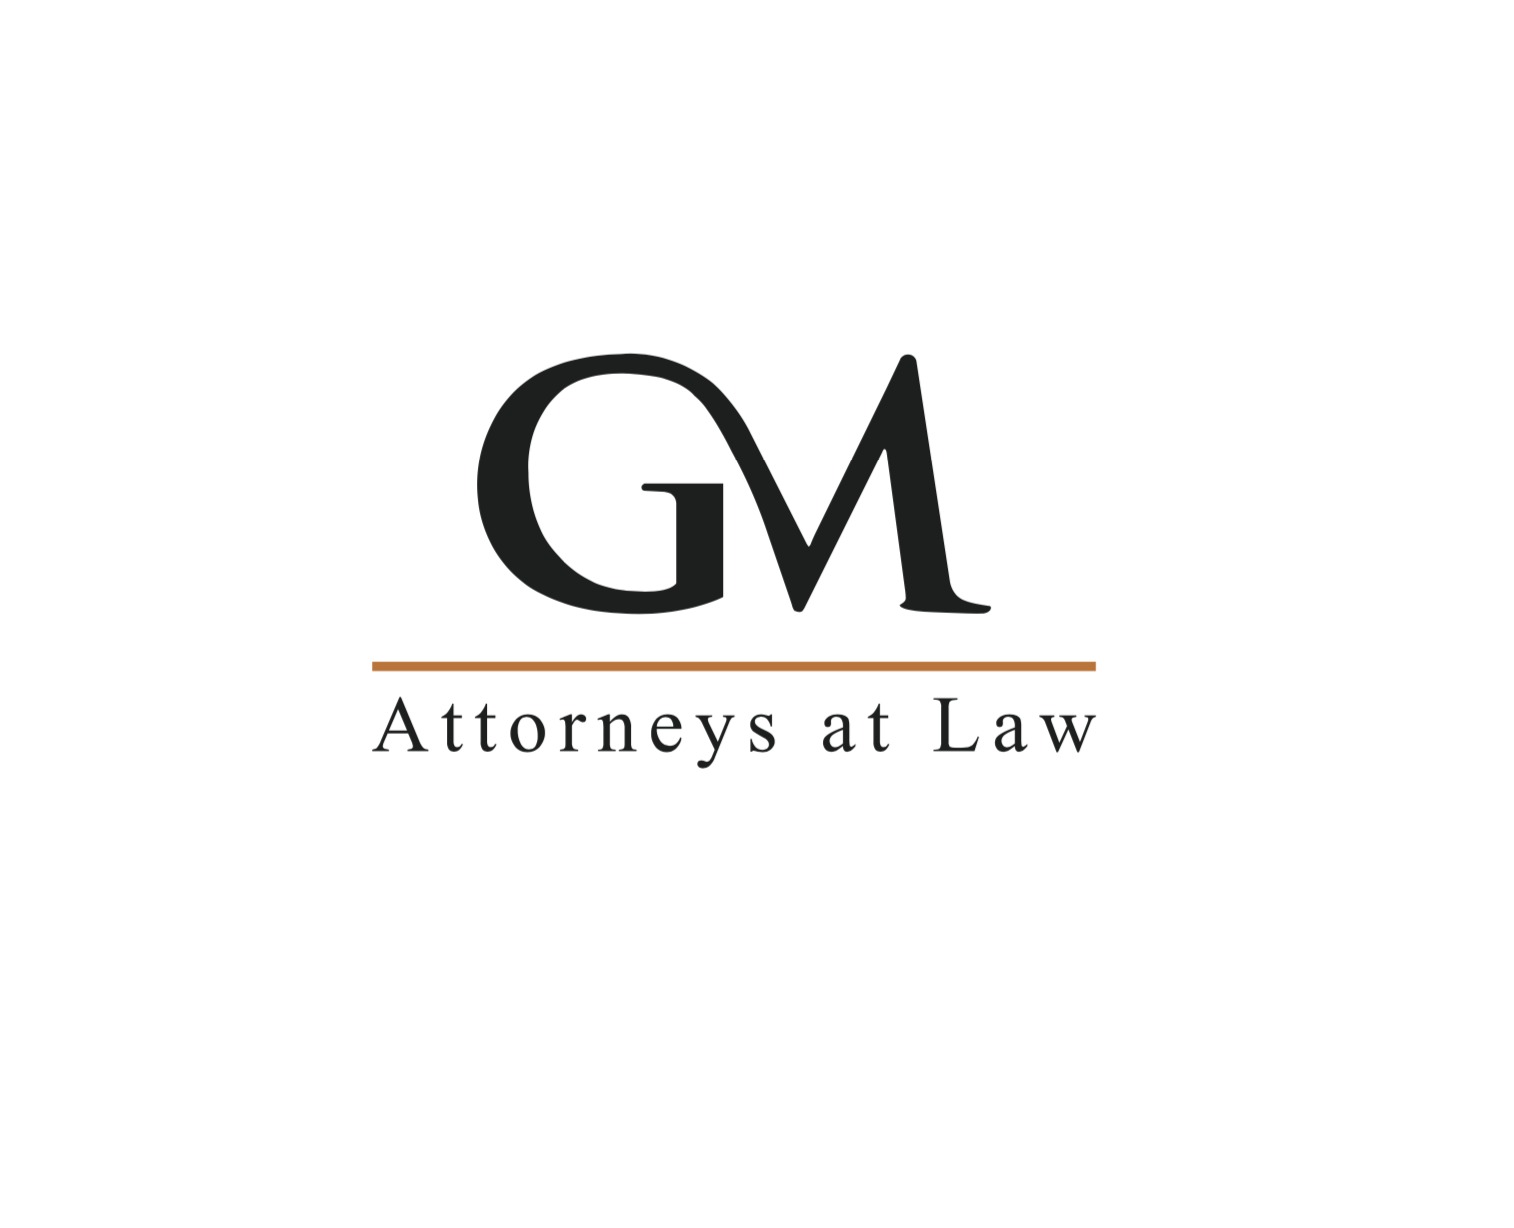 GM Attorneys at Law